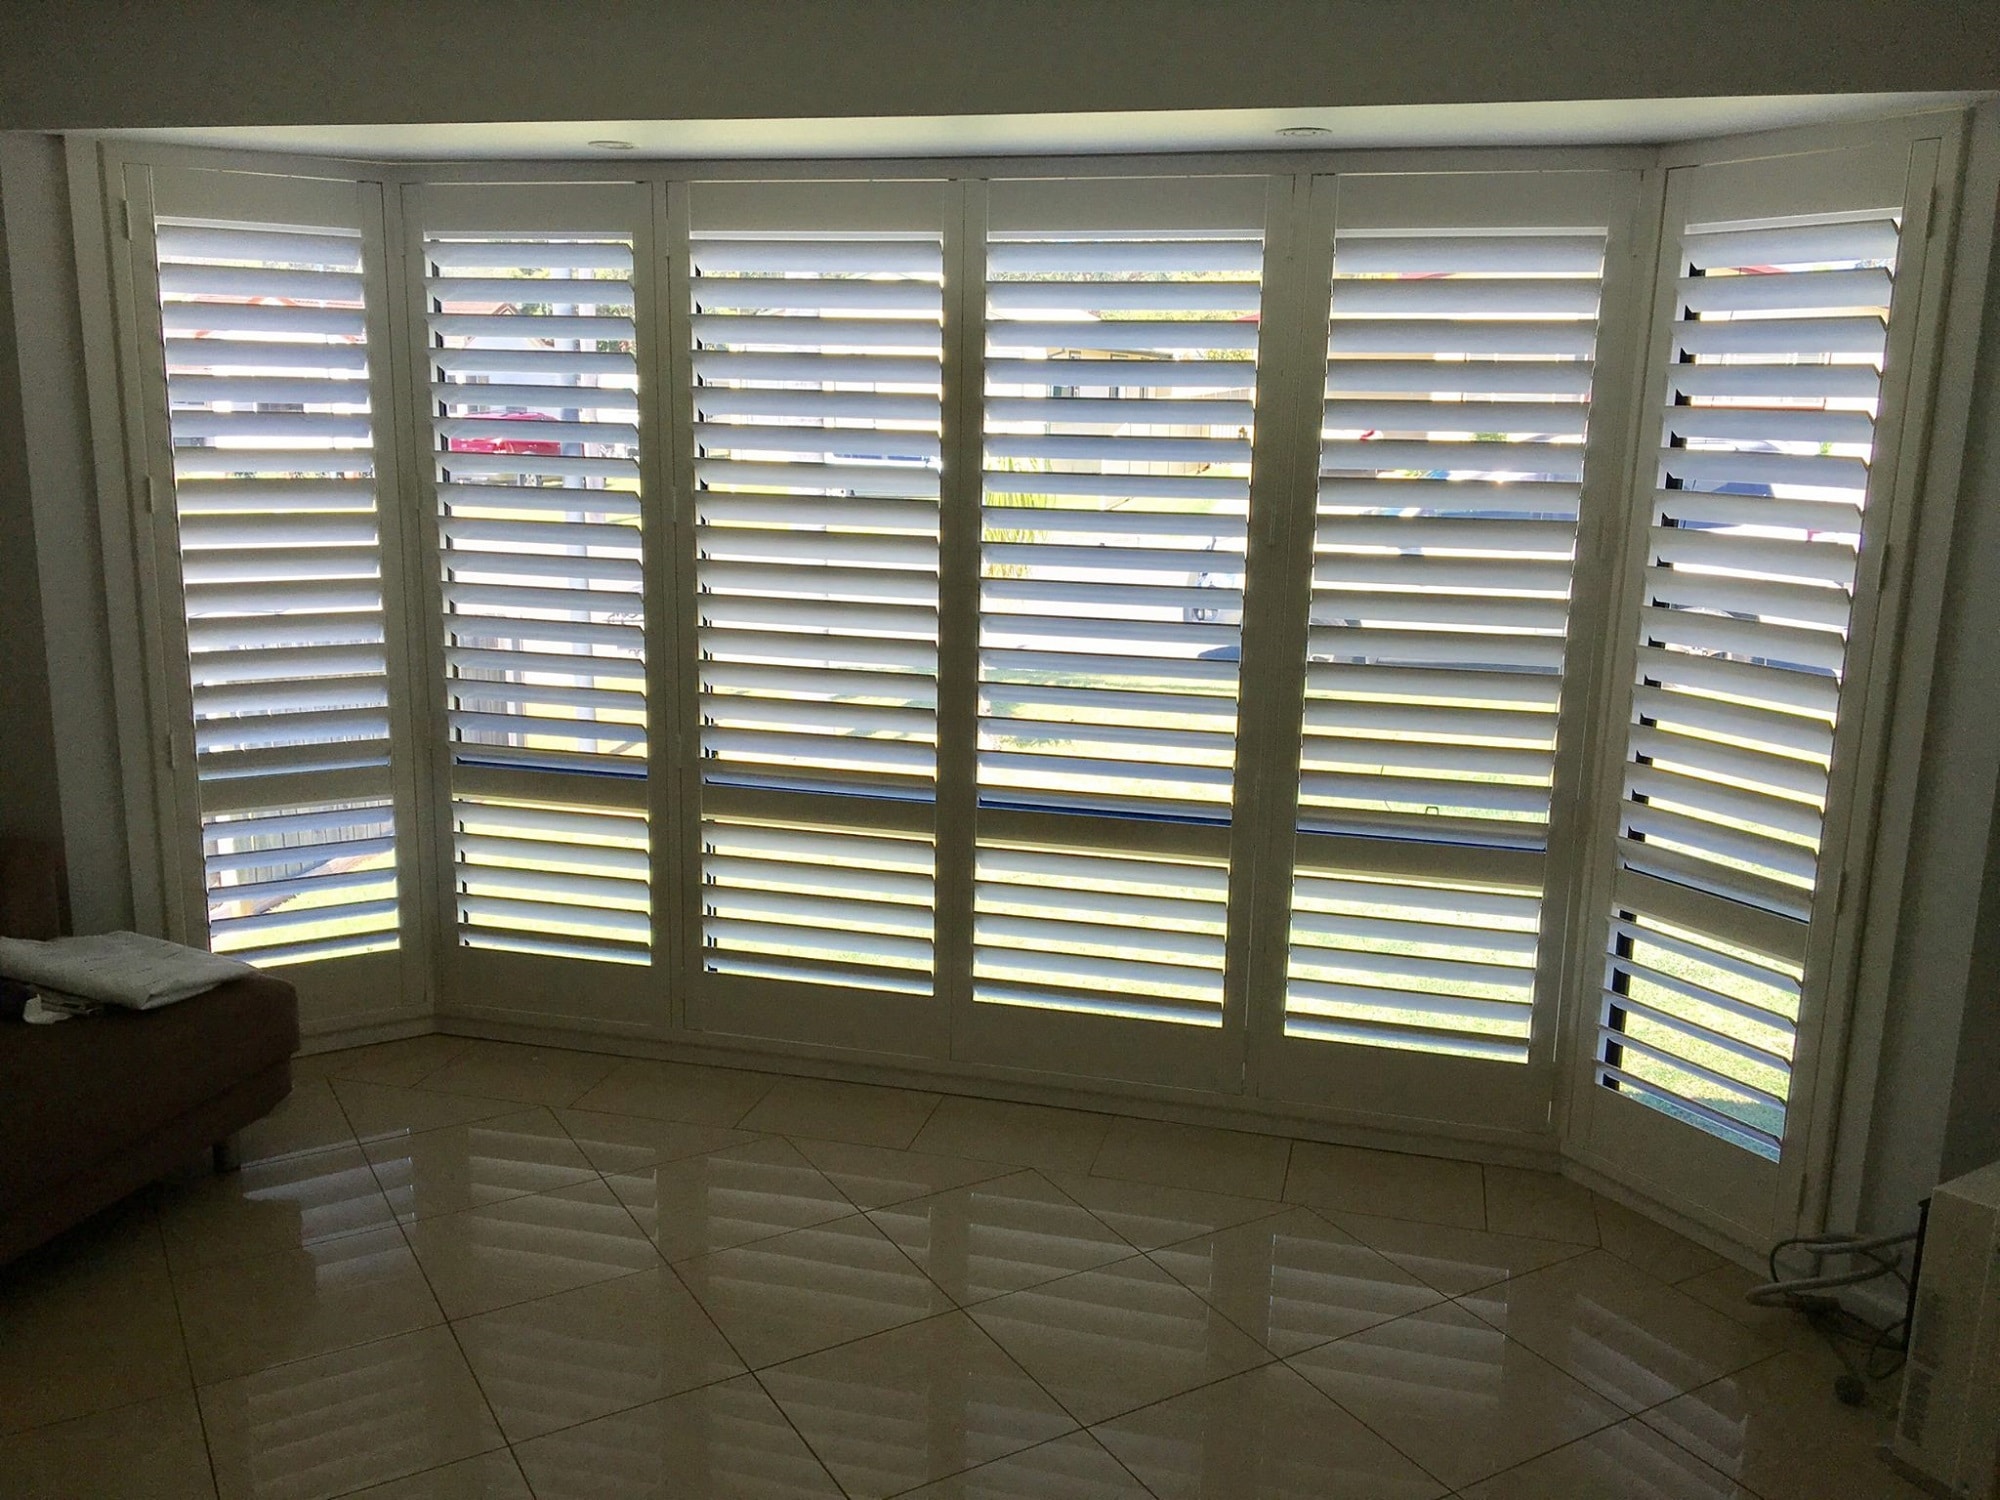 Bay window with white plantation shutters in Nowra, NSW